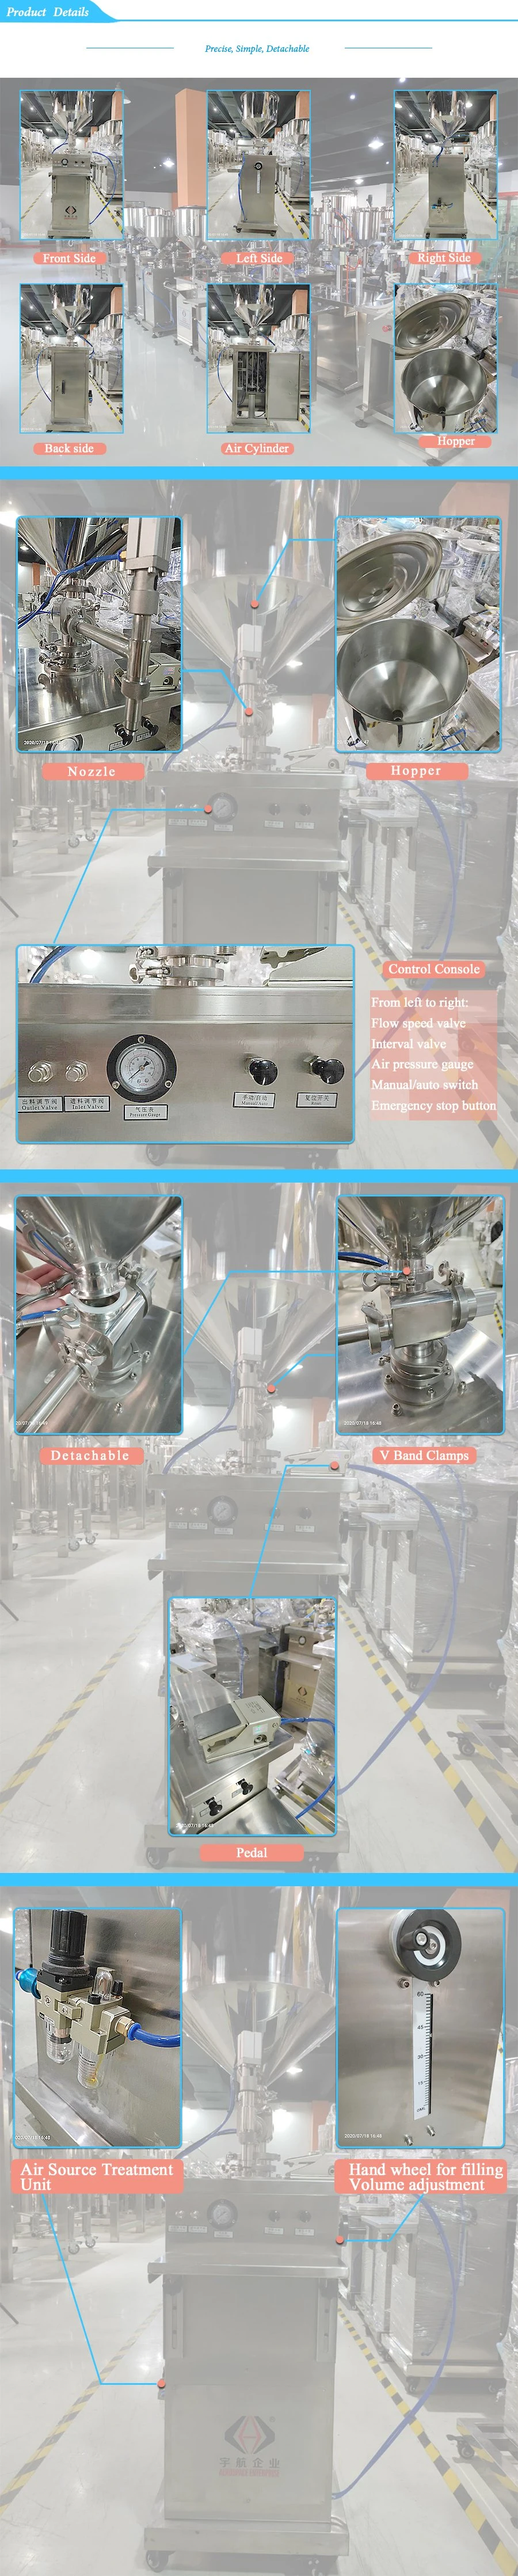 Vertical Single Head Paste Manual Hand Filling Machine/Paste Filler From China